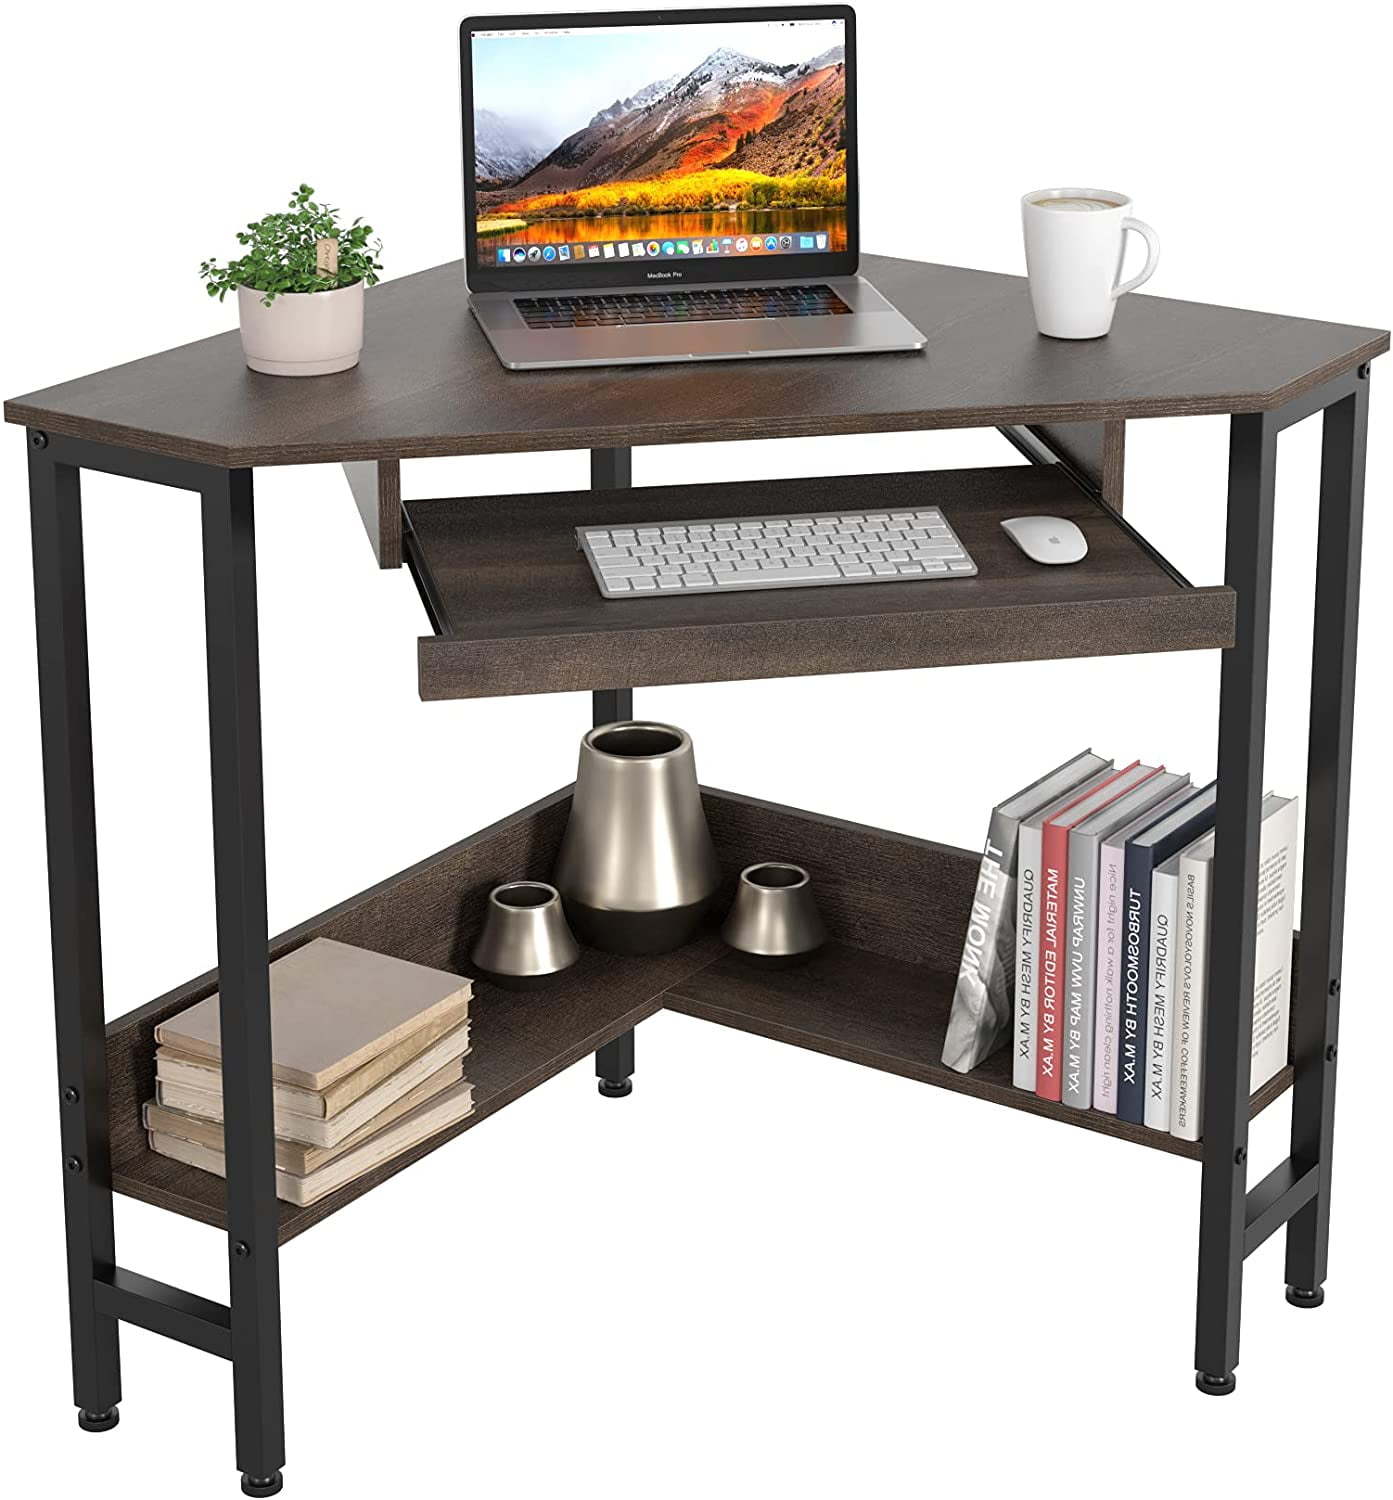 D Tools Computer Corner Desk Triangle, Small Corner Desk With Drawers And Shelves